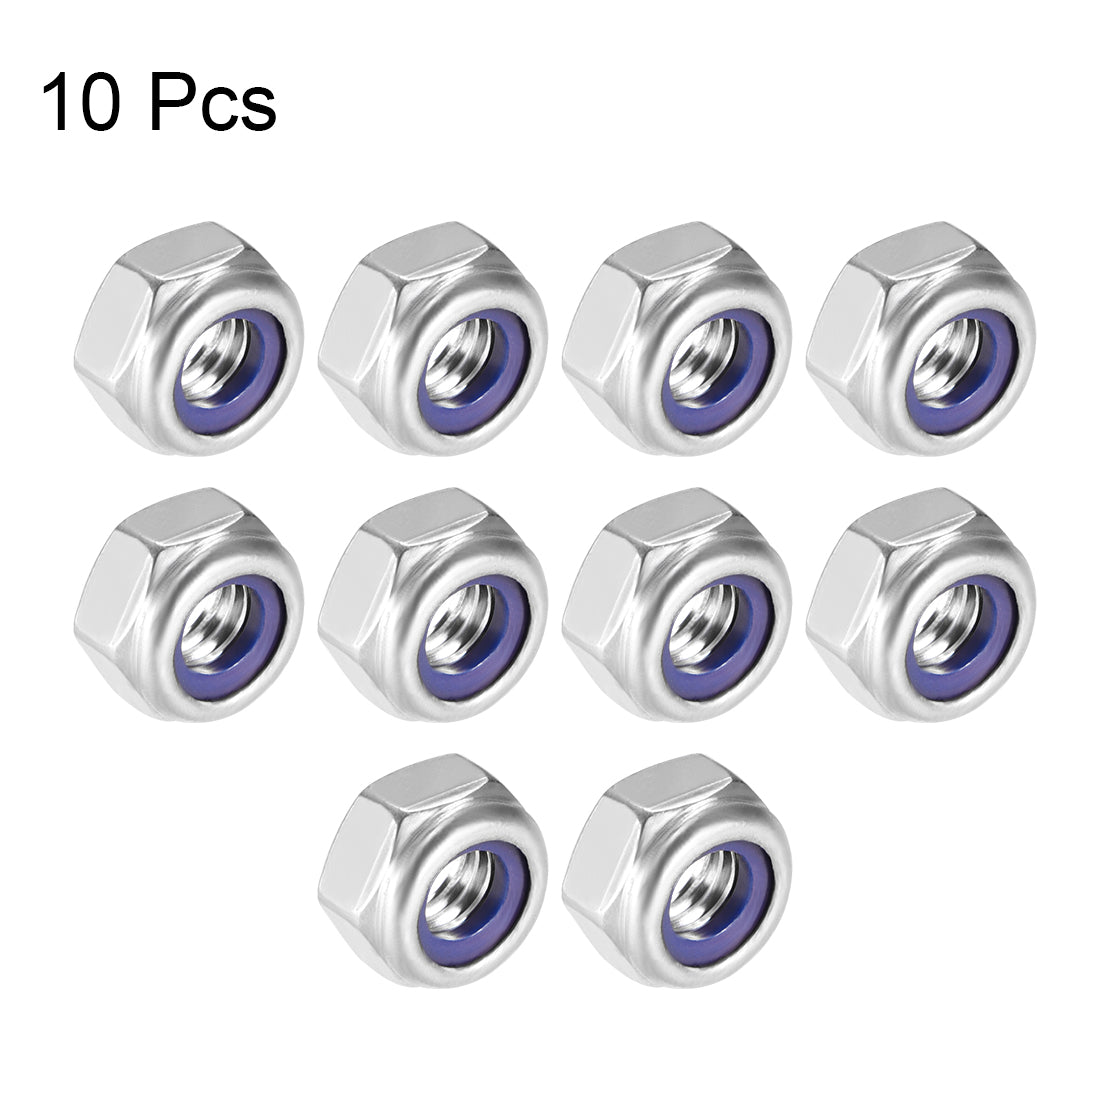 uxcell Uxcell M6 x 1mm Hex Lock Nuts Stainless Steel Nylon Insert Self-Lock Nuts, 10Pcs Silver